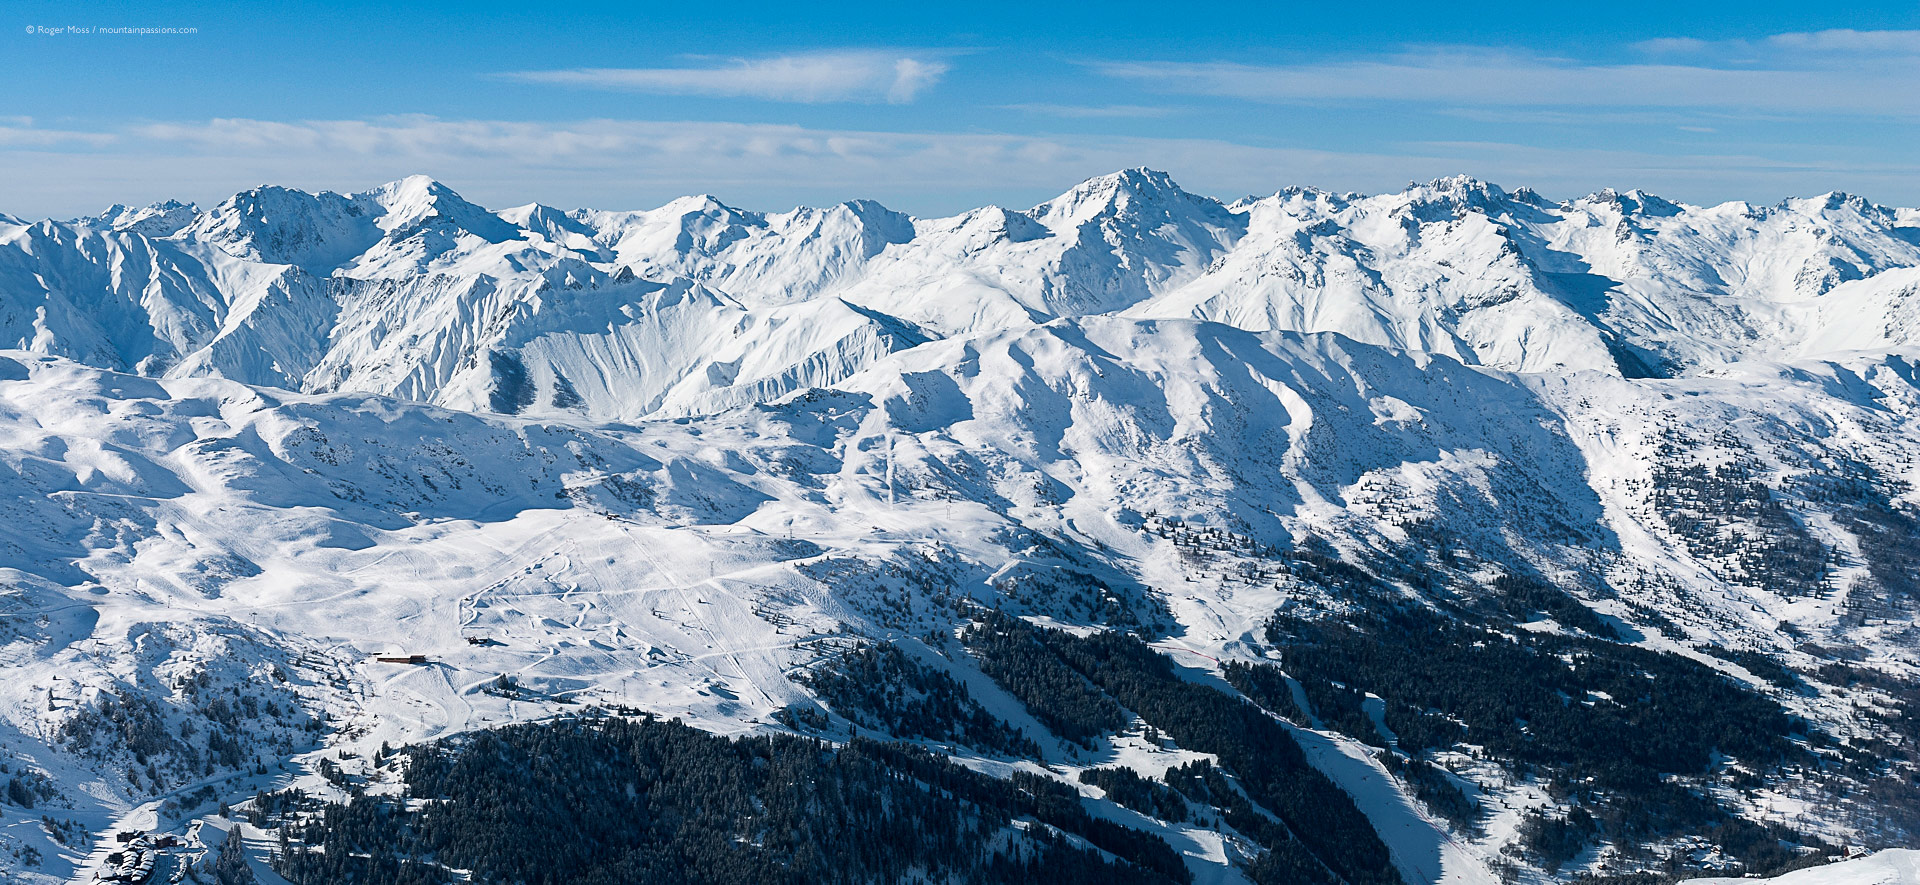 The 3 Valleys ski area, accessed from Brides-les-Bains